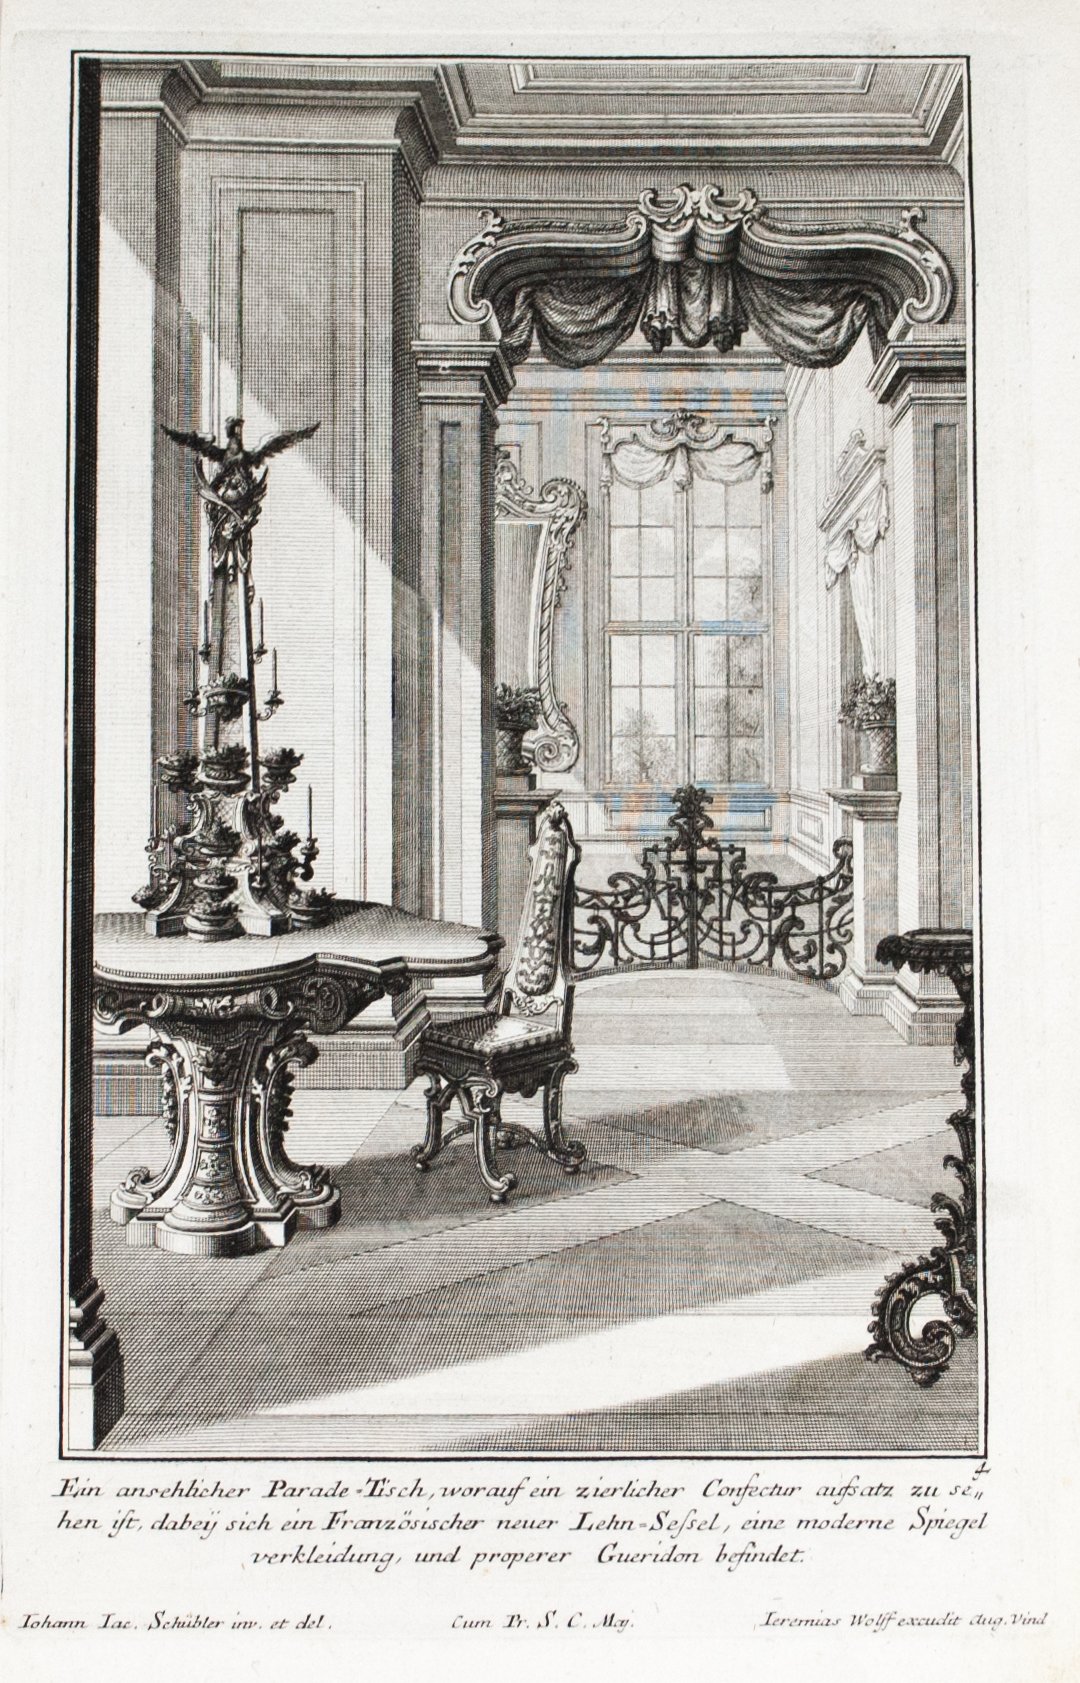 1735 Plate 4 - Parade Table with Confectur Tower - Schublers 